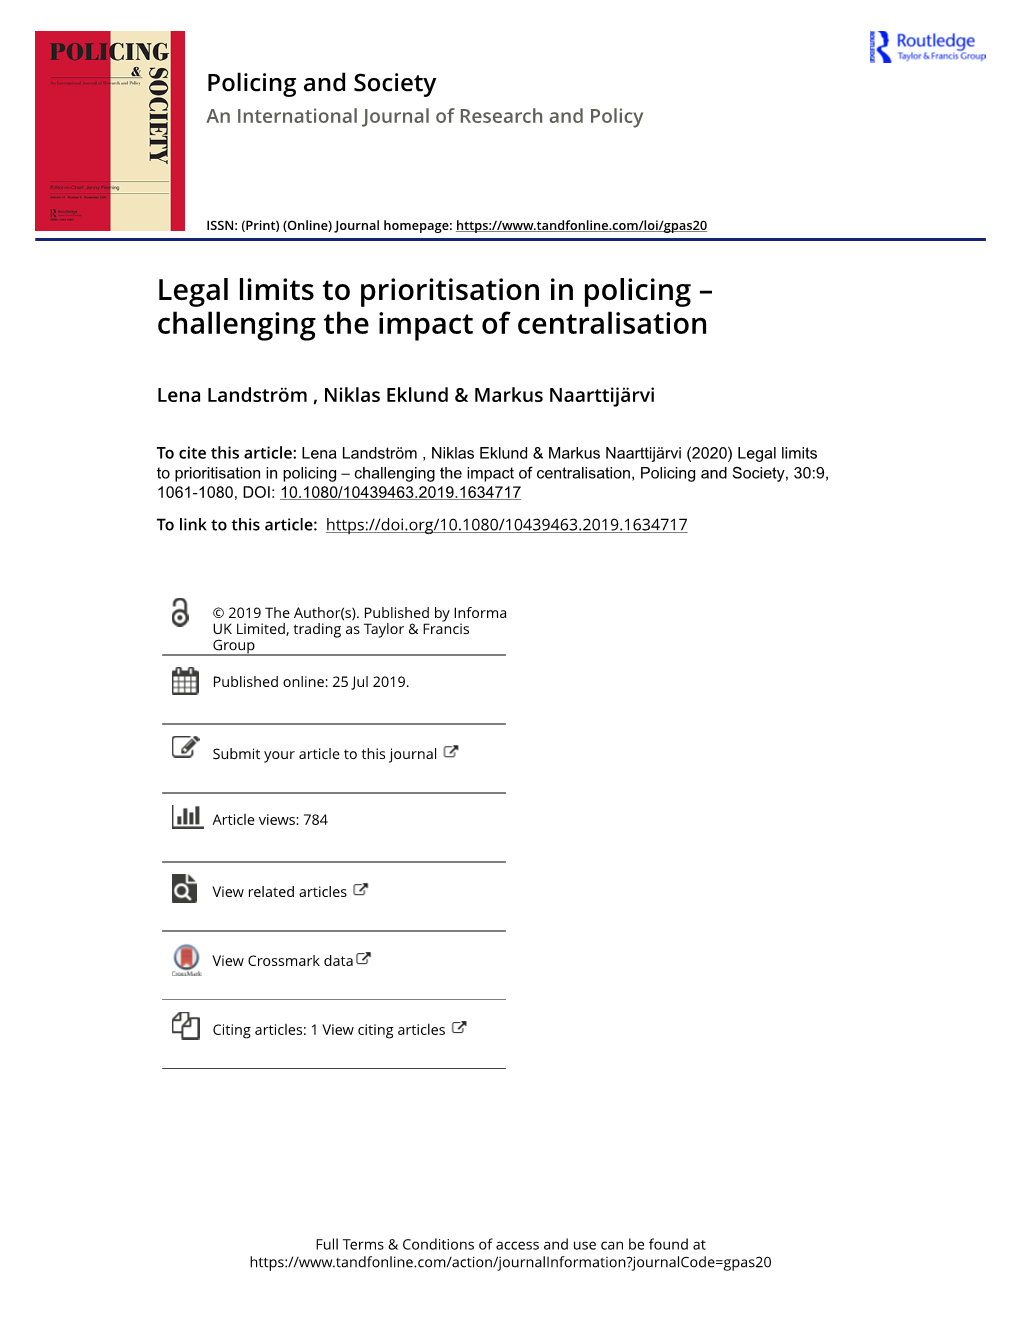 Legal Limits to Prioritisation in Policing – Challenging the Impact of Centralisation